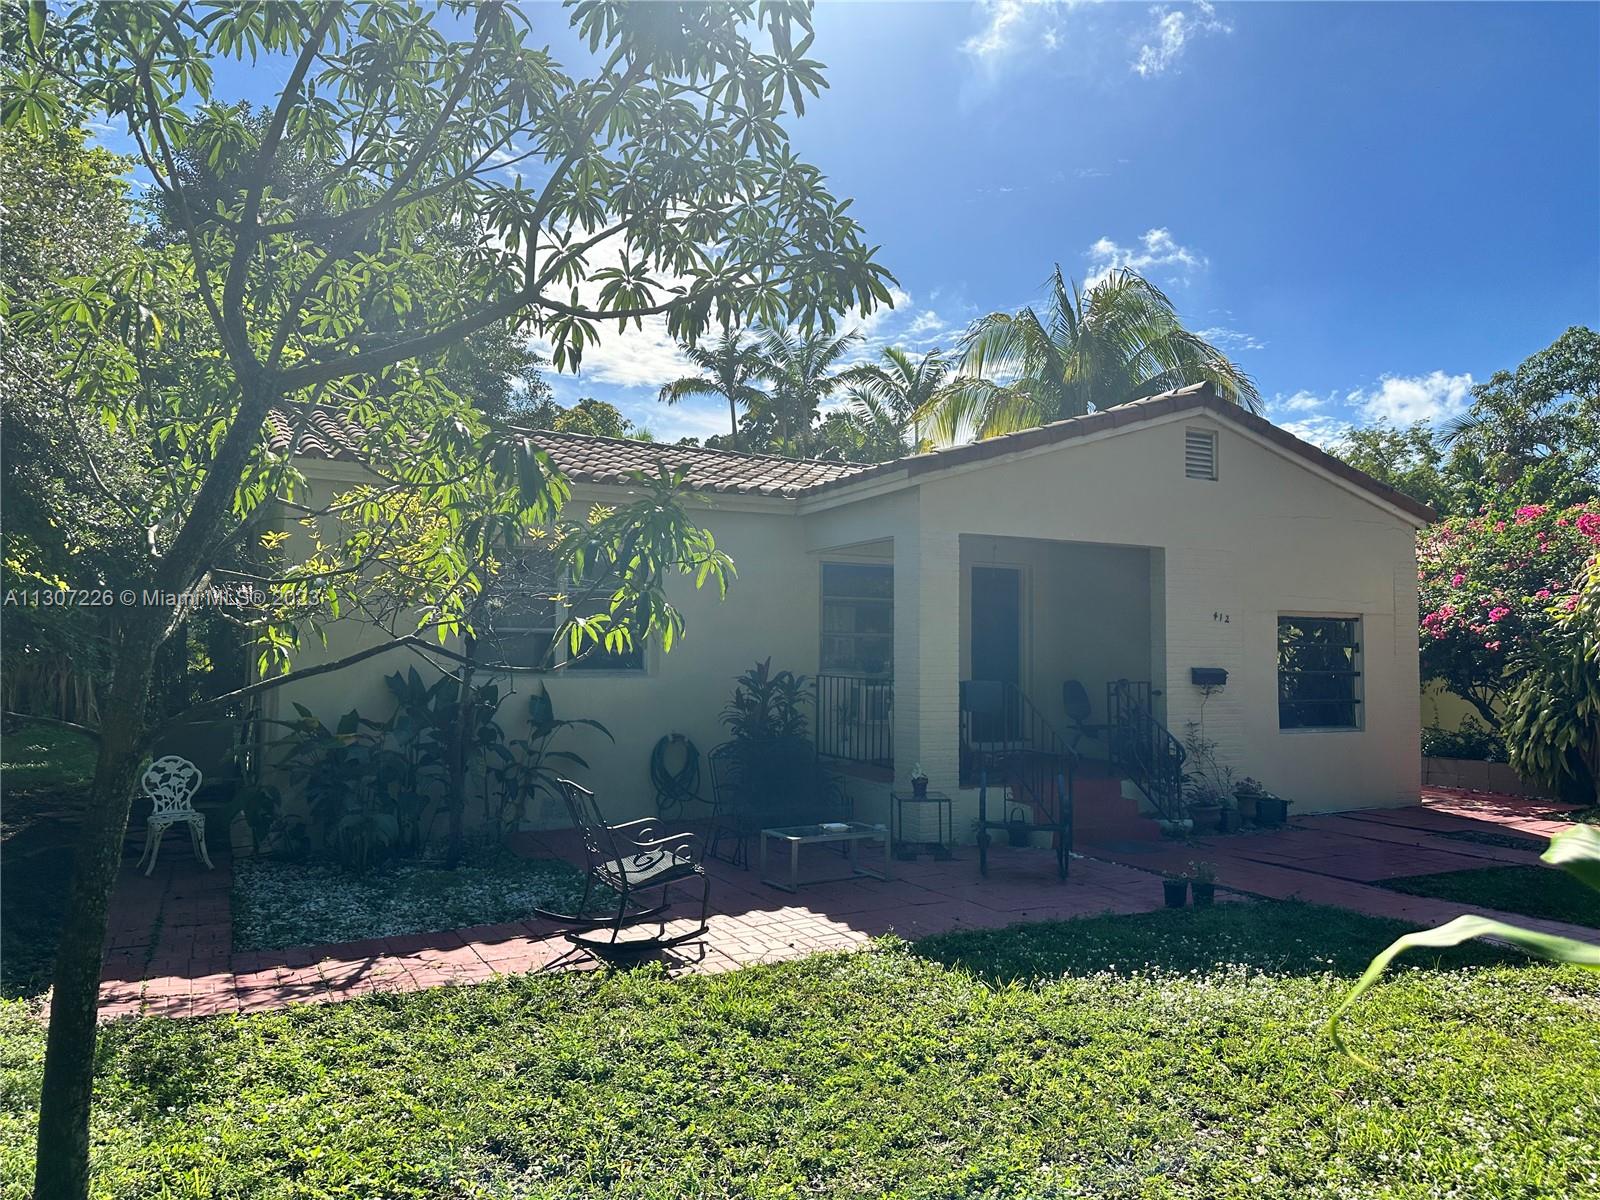 Location, location, location in this quiet Coral Gables Riviera neighborhood! This single family house is the last house on a no thru traffic street. Walking distance to Merrick Park, metrorail transit, and 10 minute drive to Miami international airport. Bring this house to the modern age and make it your own with this 6,250 SQ FT lot.  Showings by appointment only.